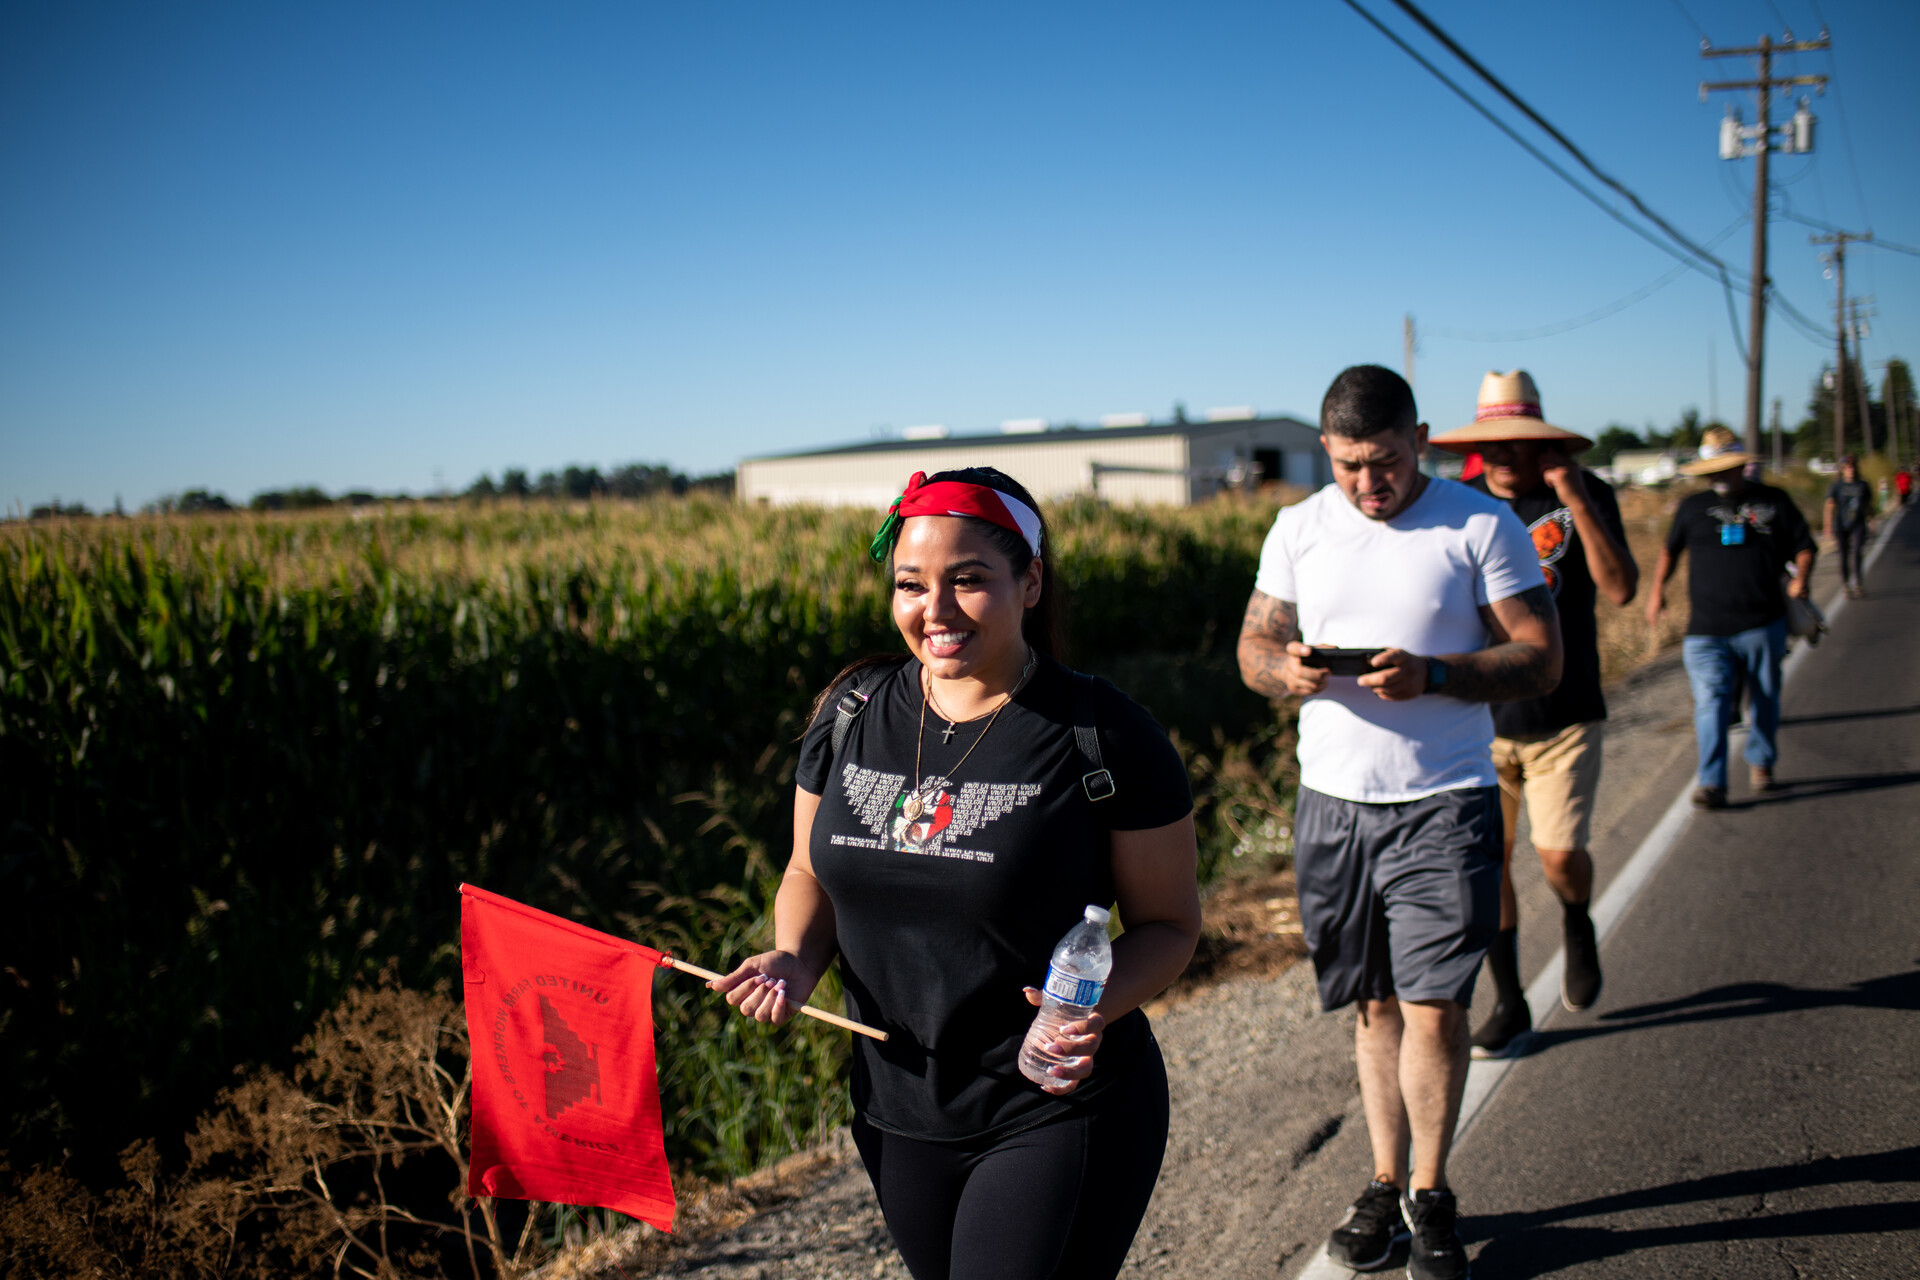 A smiling woman holds a red flag as she walks in front of a line of marchers along a country road in the sunshine